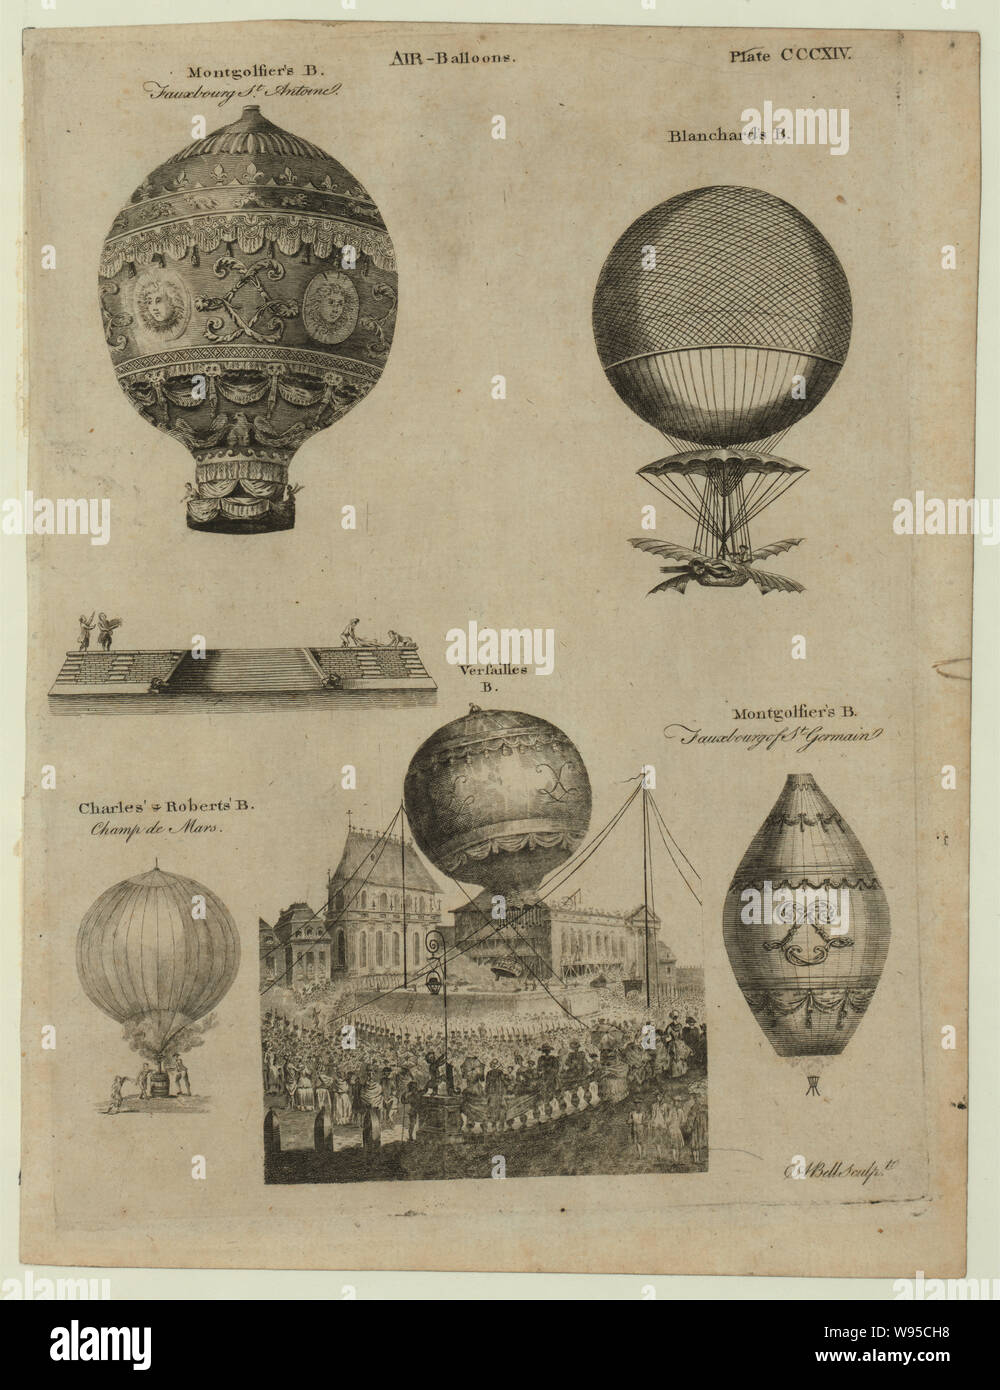 Air-balloons Book illustration shows five early balloon ascensions in France: two Montgolfier balloons (Fauxbourg St. Antoine and St. Germain) a 1784 balloon of Jean-Pierre Blanchard and a Charles and Robert balloon being inflated at Champs-de-Mar and ascending at Versailles on September 19, 1783. (Source: A.G. Renstrom, LC staff, 1981-82). Stock Photo